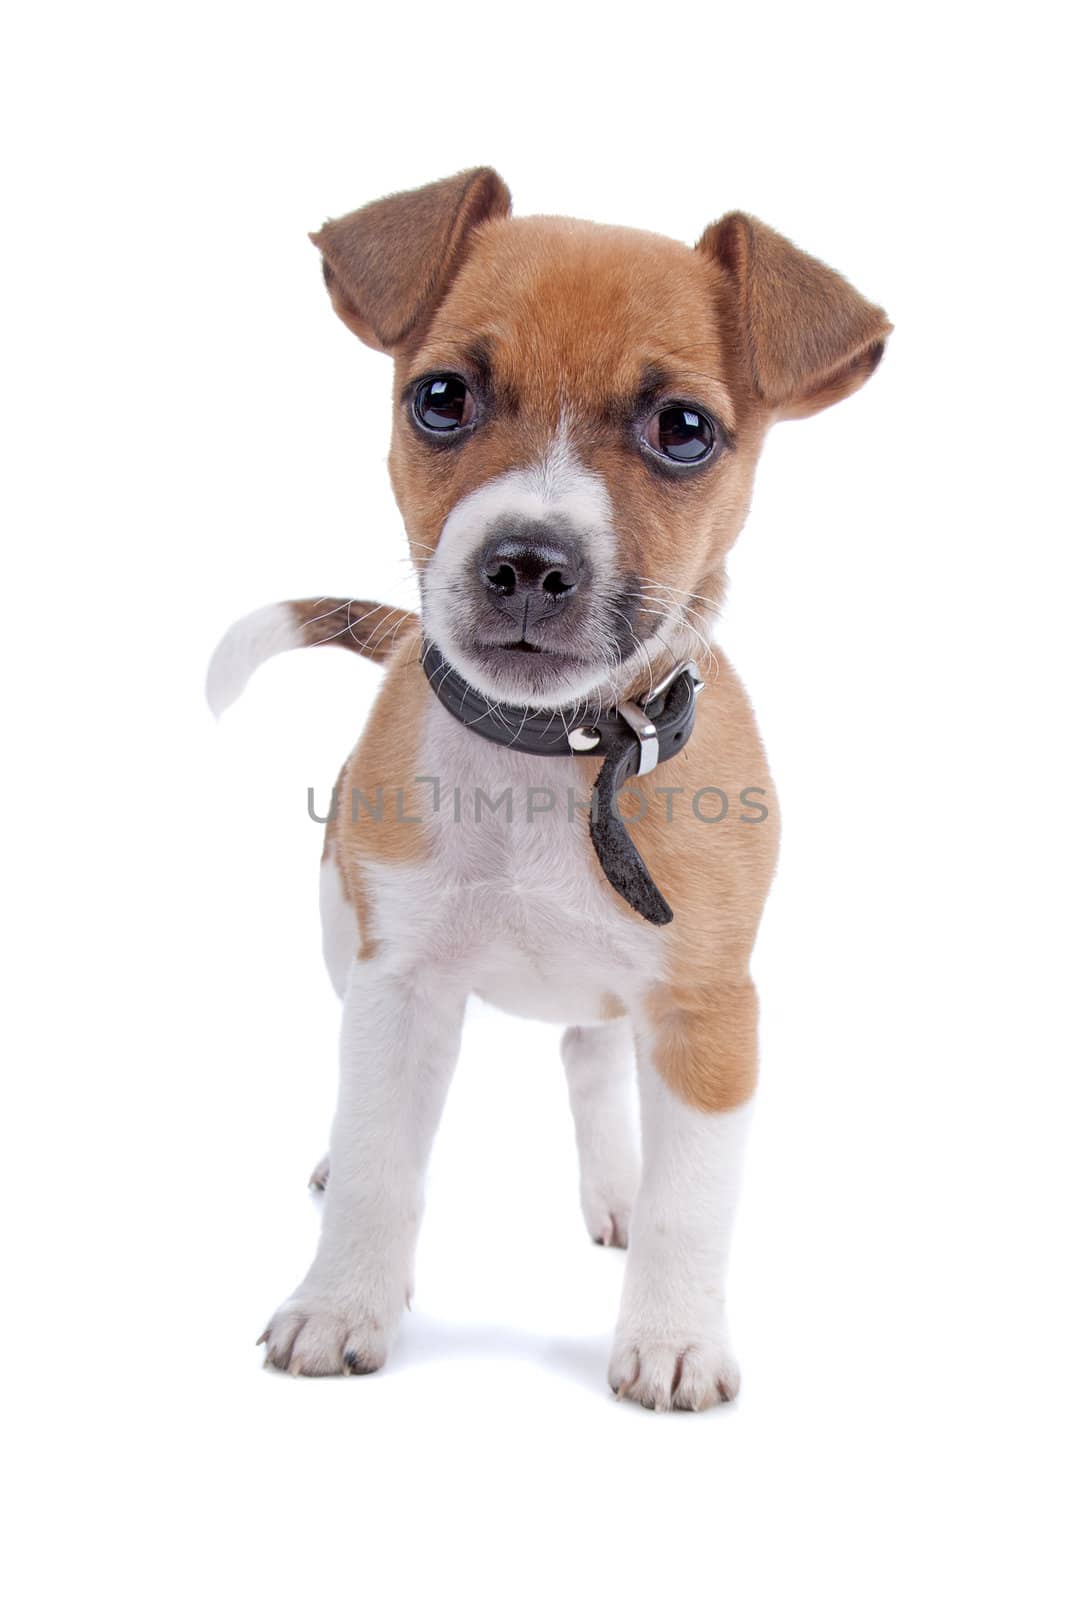 Jack Russel Terrier puppy looking at camera, isolated on a white background